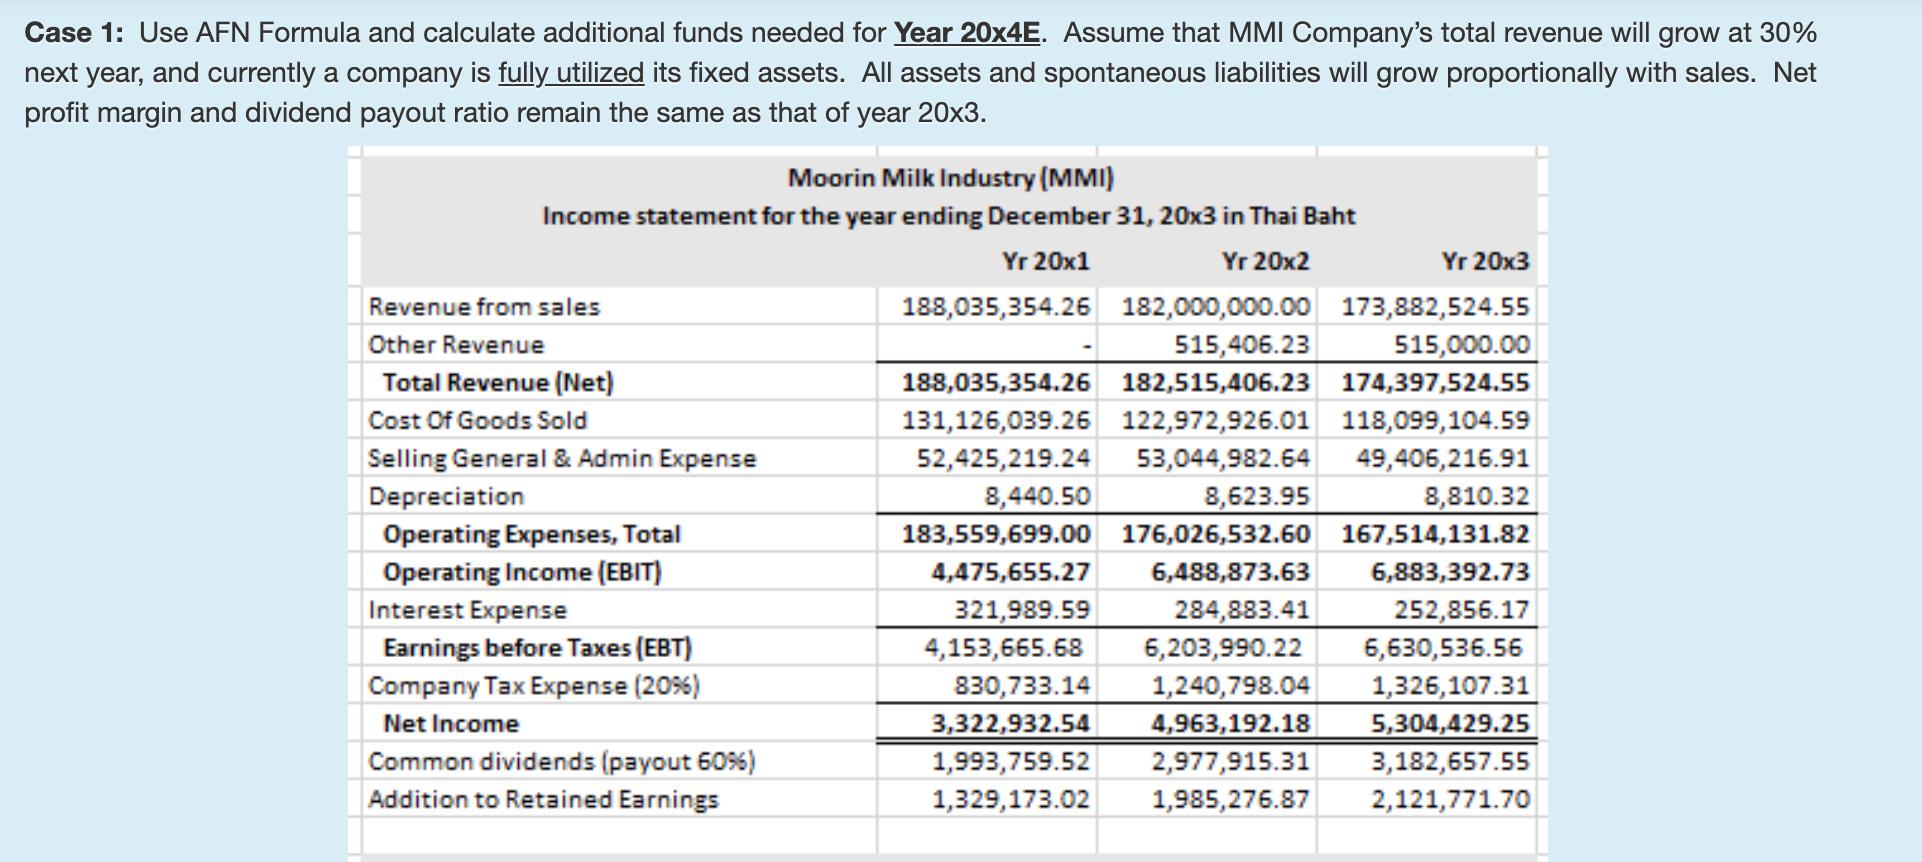 Case 1: Use AFN Formula and calculate additional funds needed for Year 20x4E. Assume that MMI Company's total